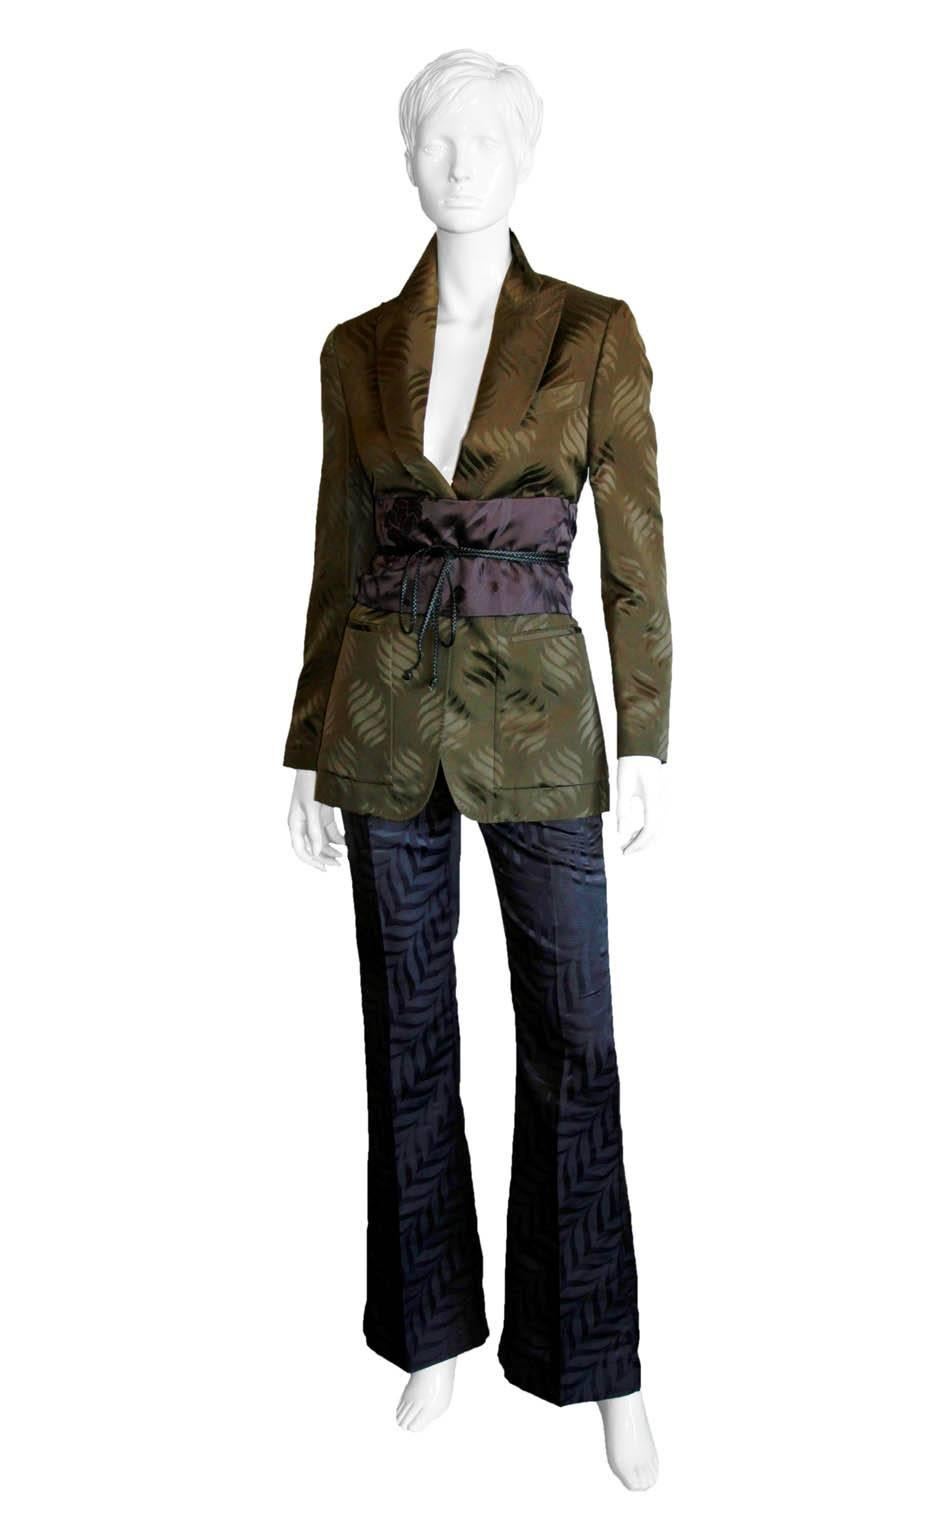 Iconic Tom Ford For Gucci Fall Winter 2002 Gothic Collection Silk Kimono Jacket, Pants & Obi In Khaki & Aubergine!

Who could ever forget Tom Ford's fall/winter 2002 Gothic Collection for Gucci... with that dark chinoiseriesque styling & heavenly